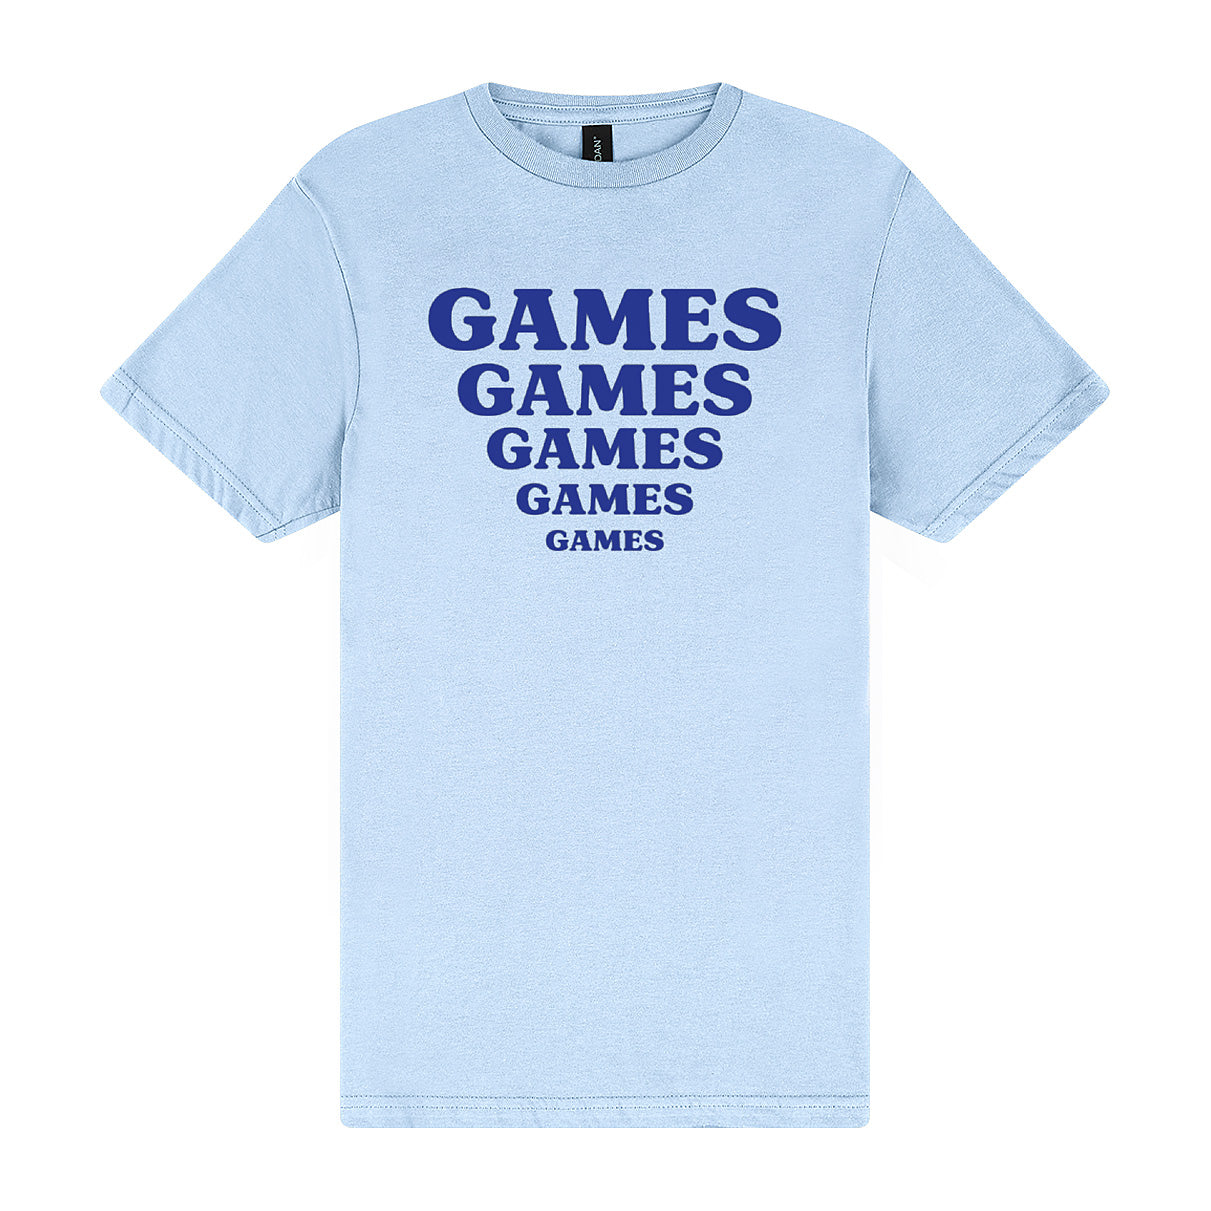 Games Games Games Tee